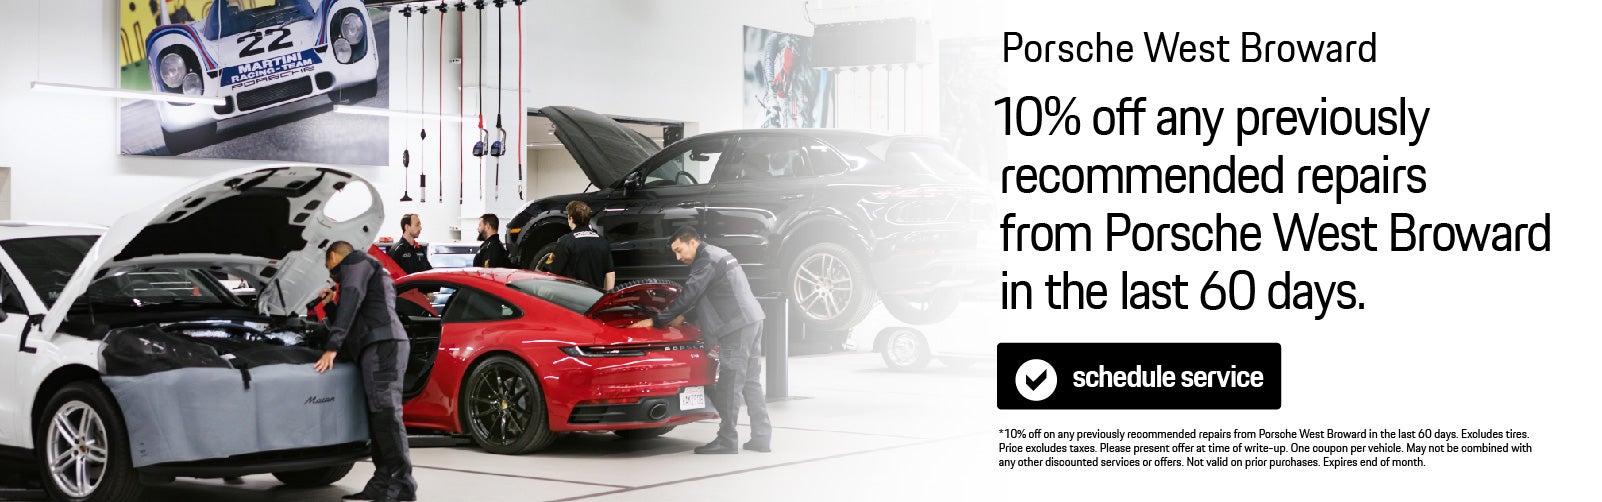 10% Off any previously recommended repairs.